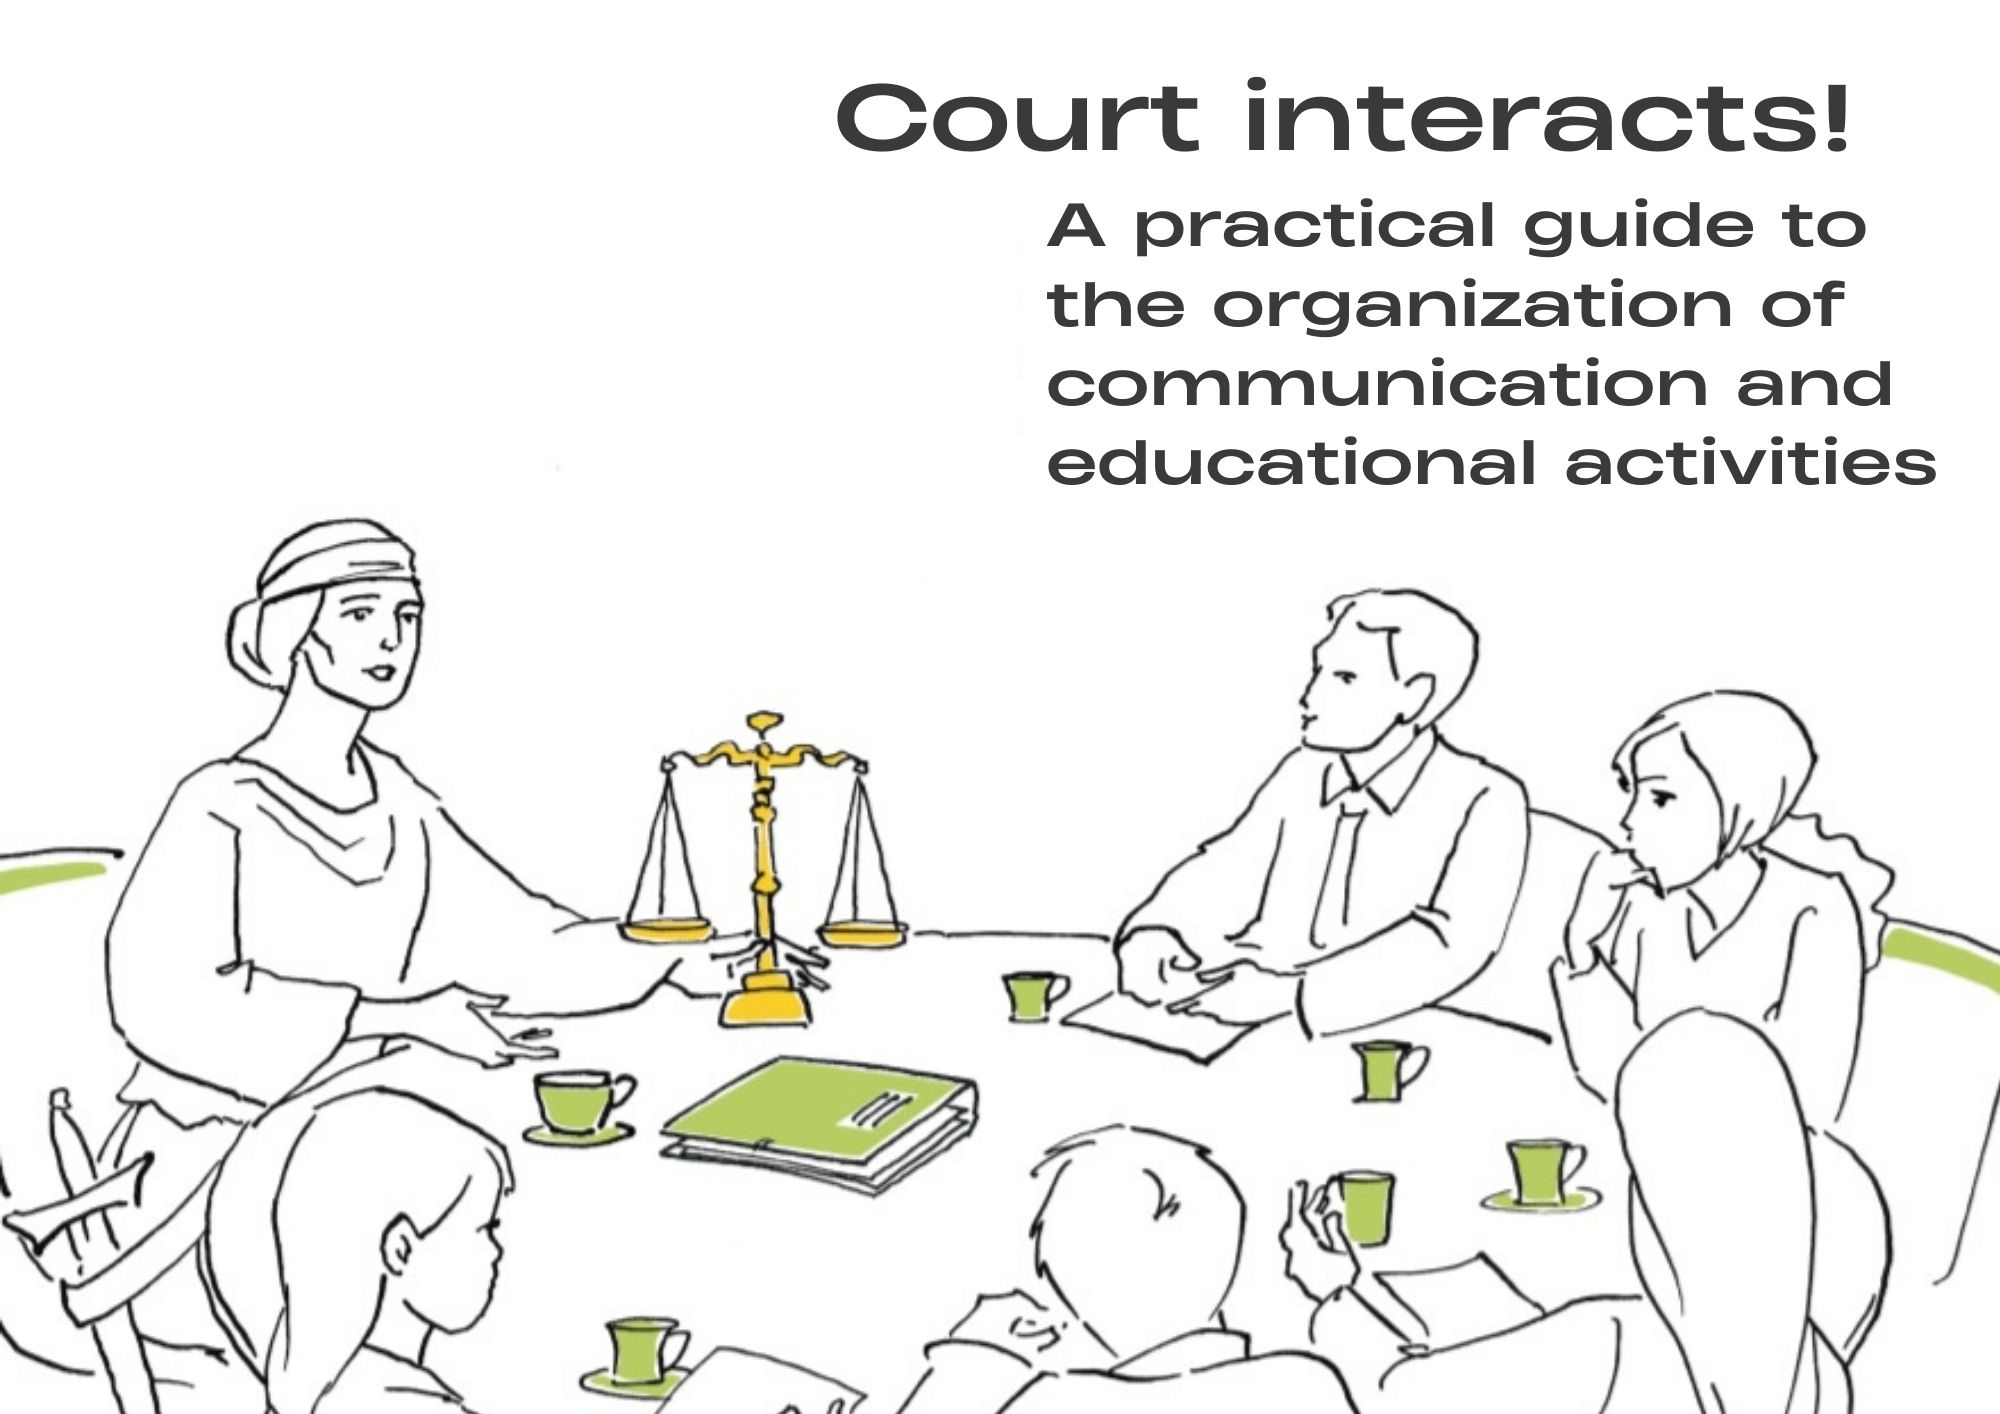 Guide "Court interacts!"